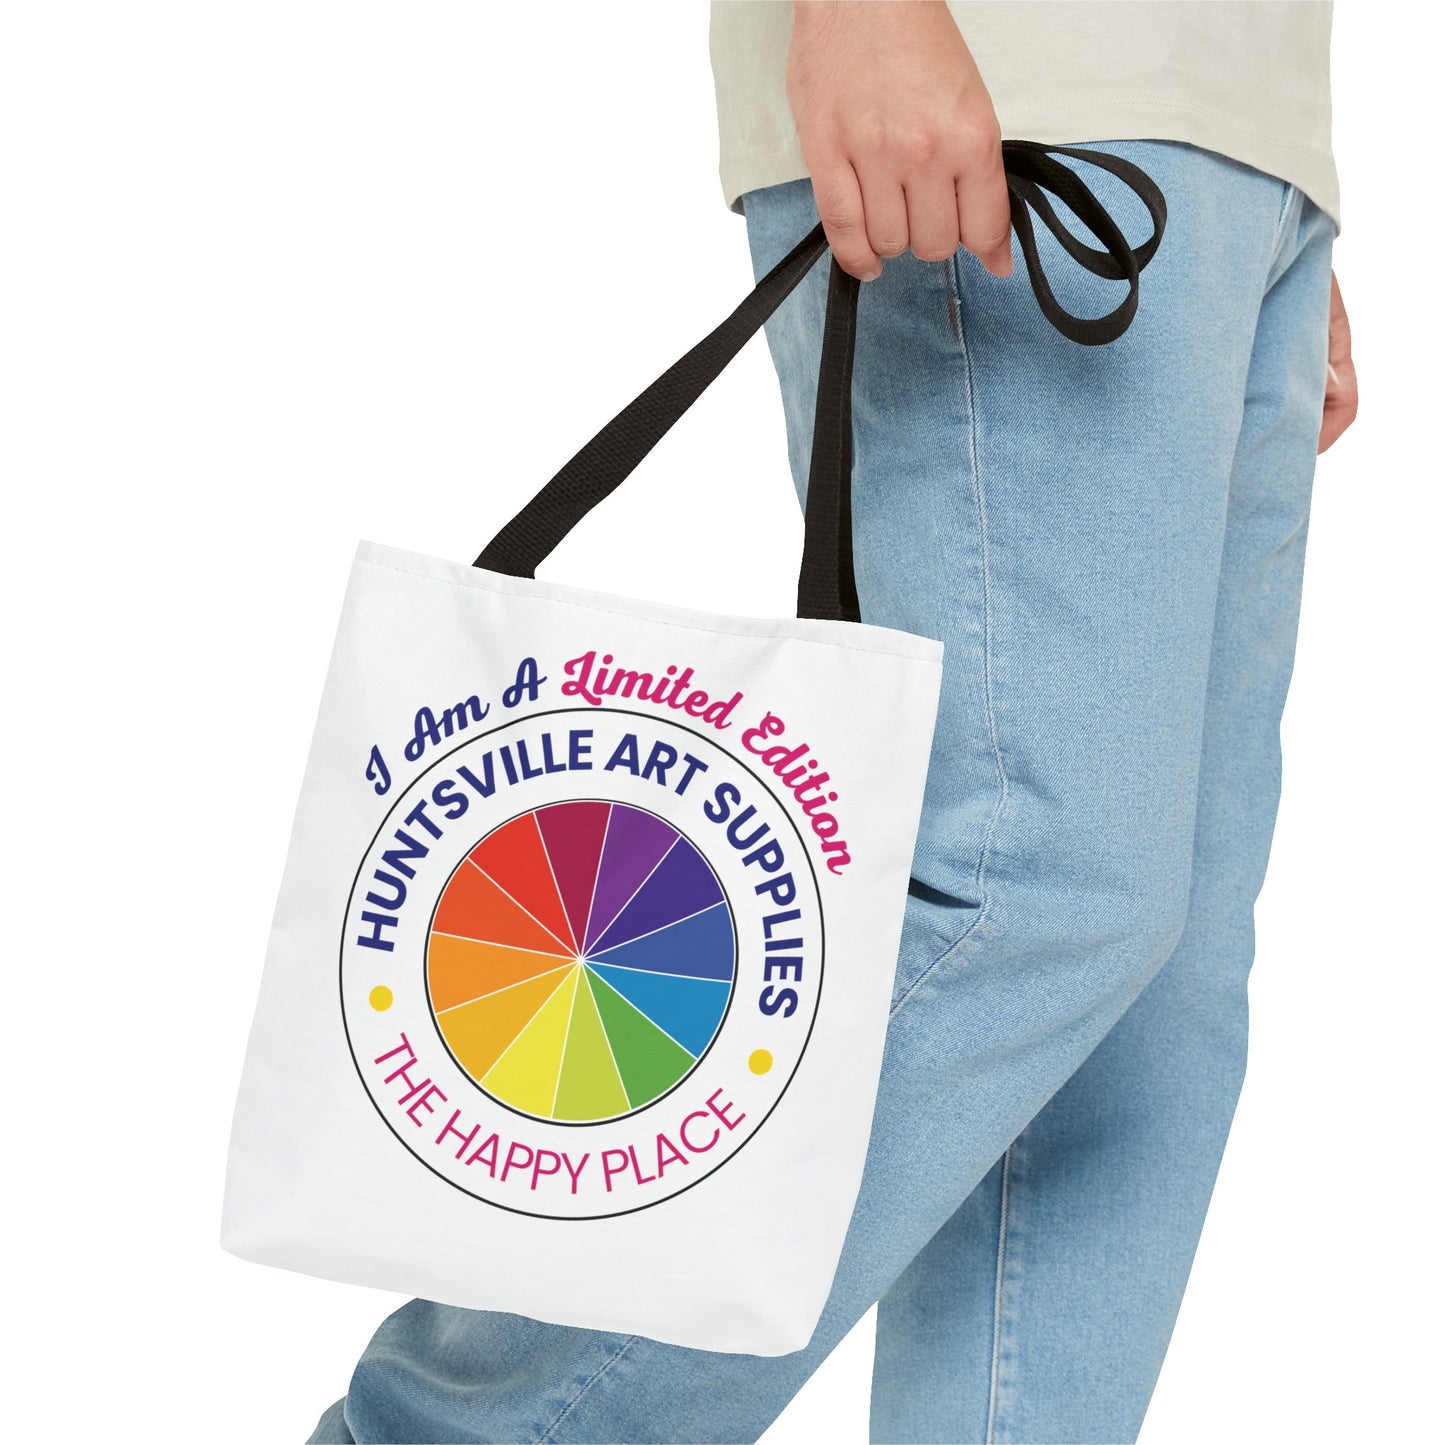 I Am A Limited Edition - Huntsville Art Supplies Tote - Only 150 Will Be Made